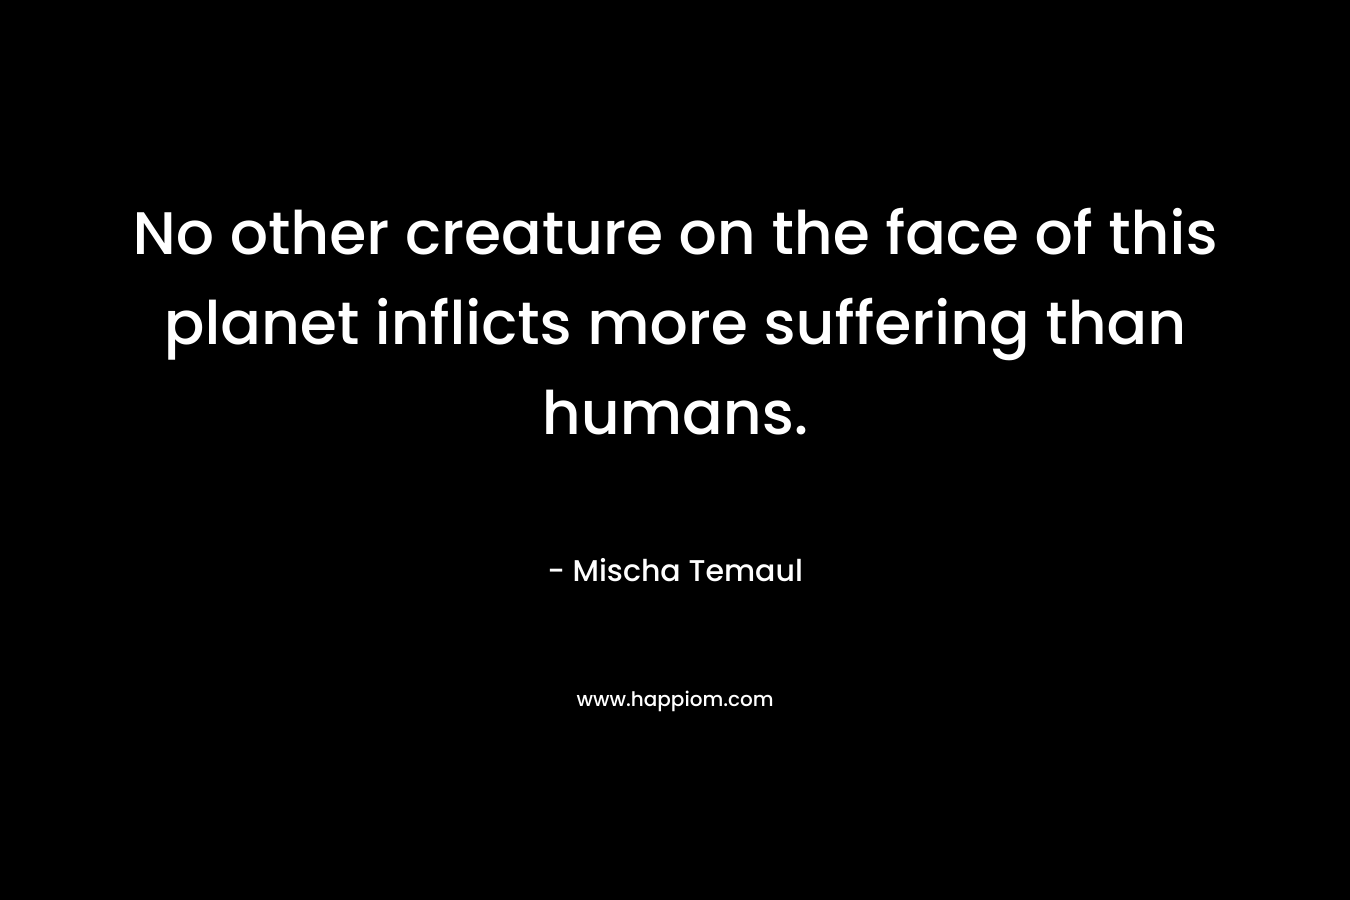 No other creature on the face of this planet inflicts more suffering than humans. – Mischa Temaul